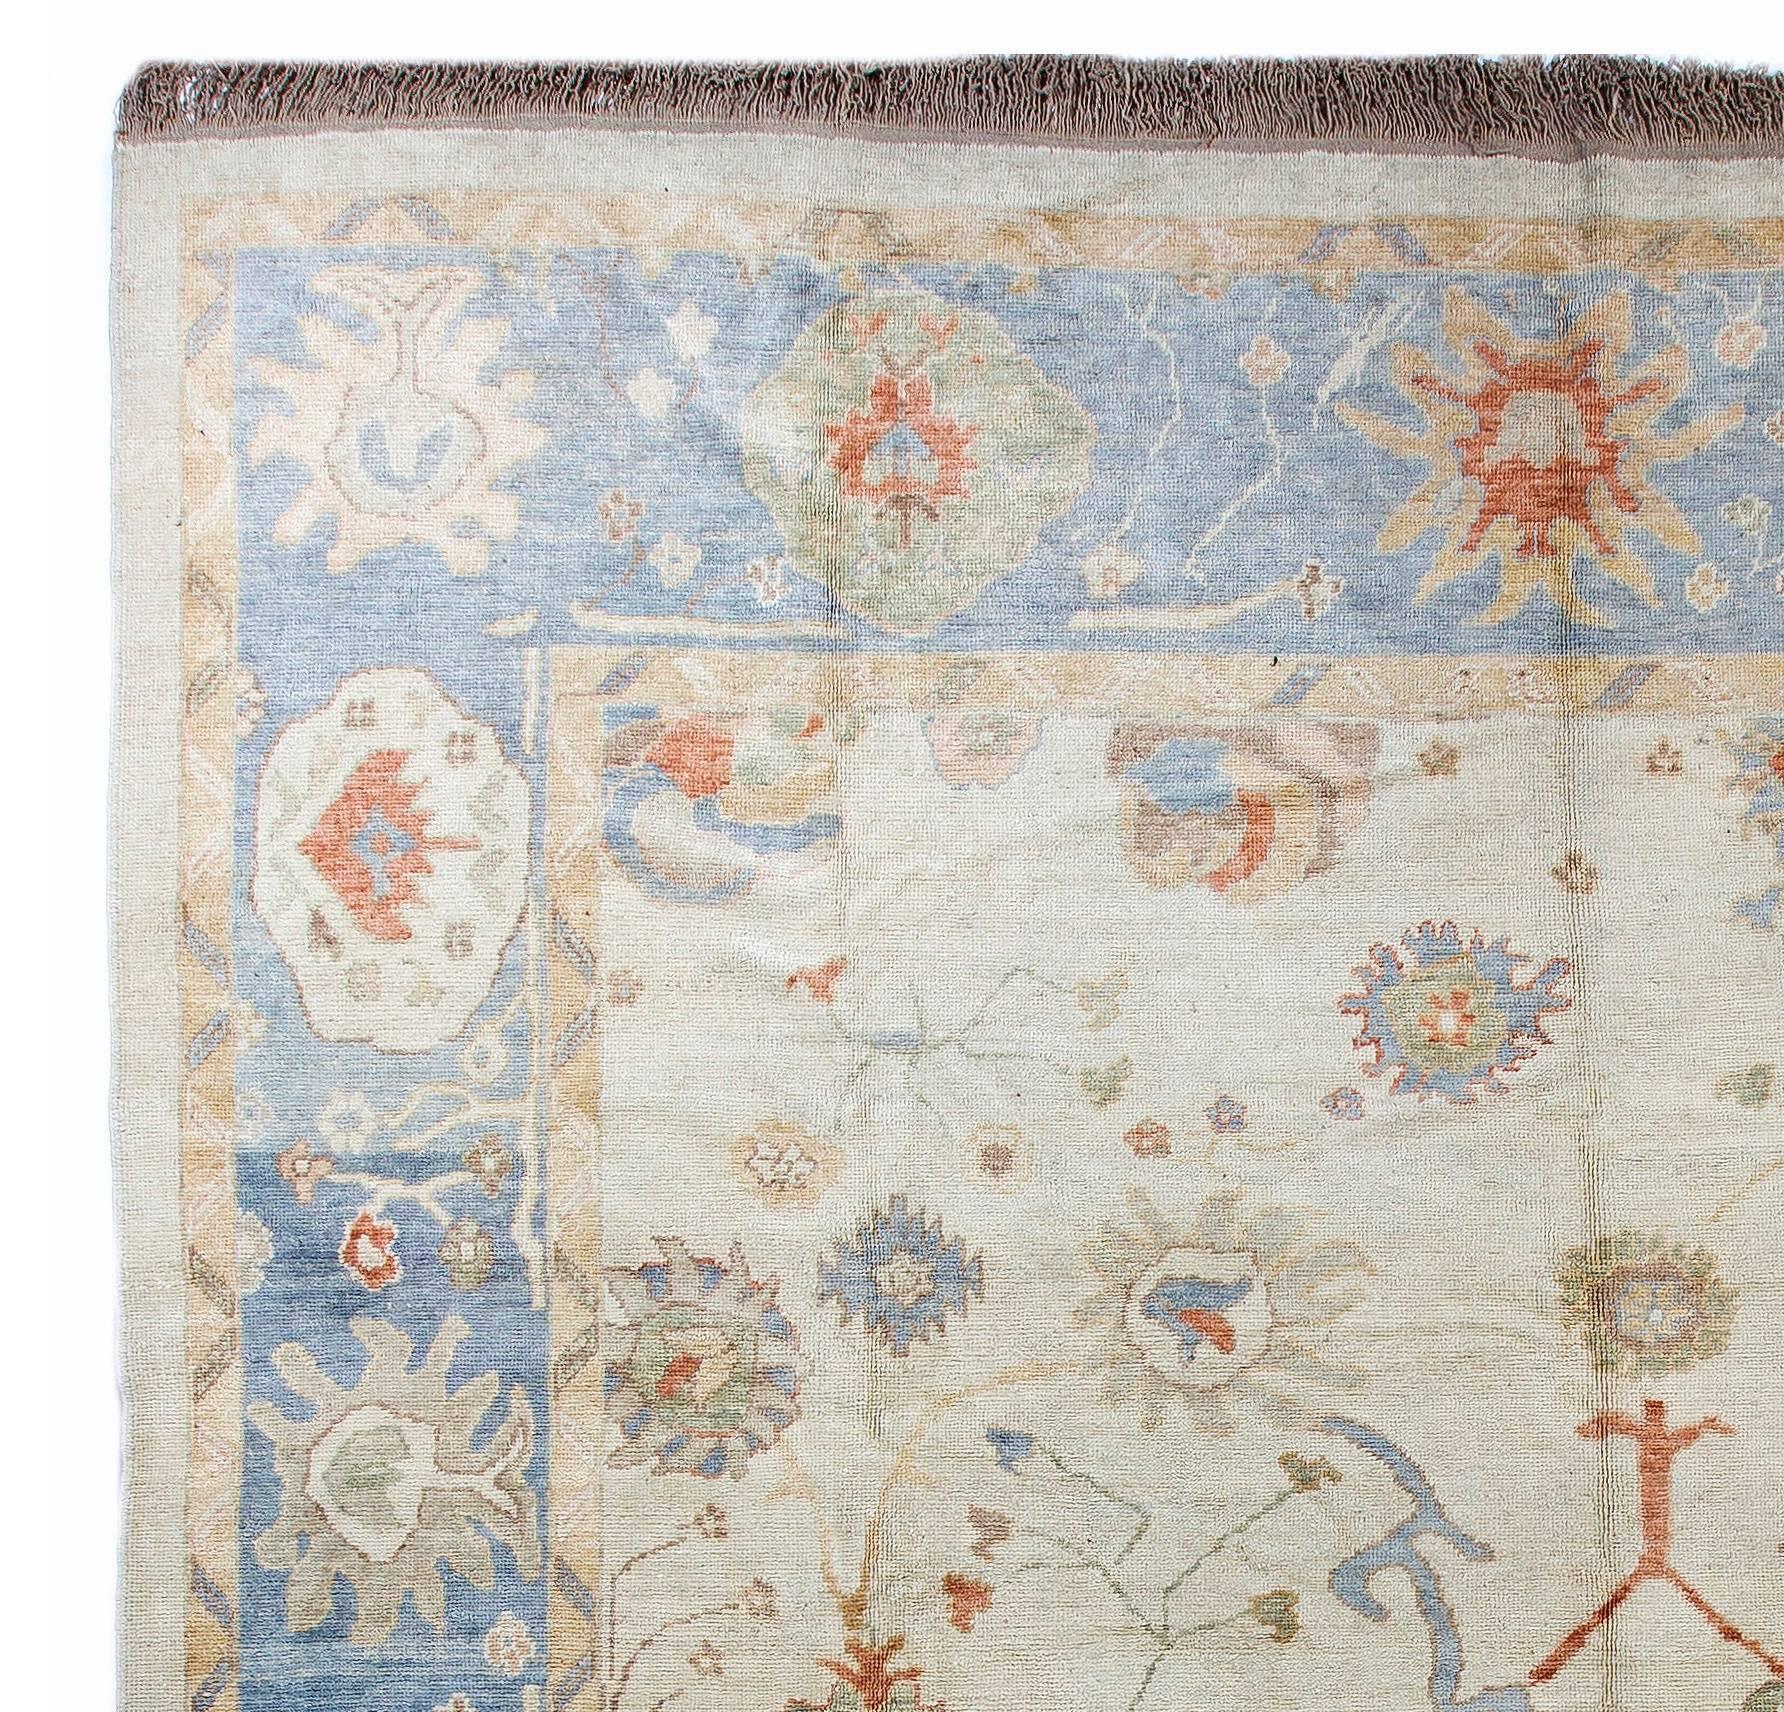 An antique inspired and look hand-knotted Oushak carpet made with lustrous hand-spun sheep wool.

Size: 12'6